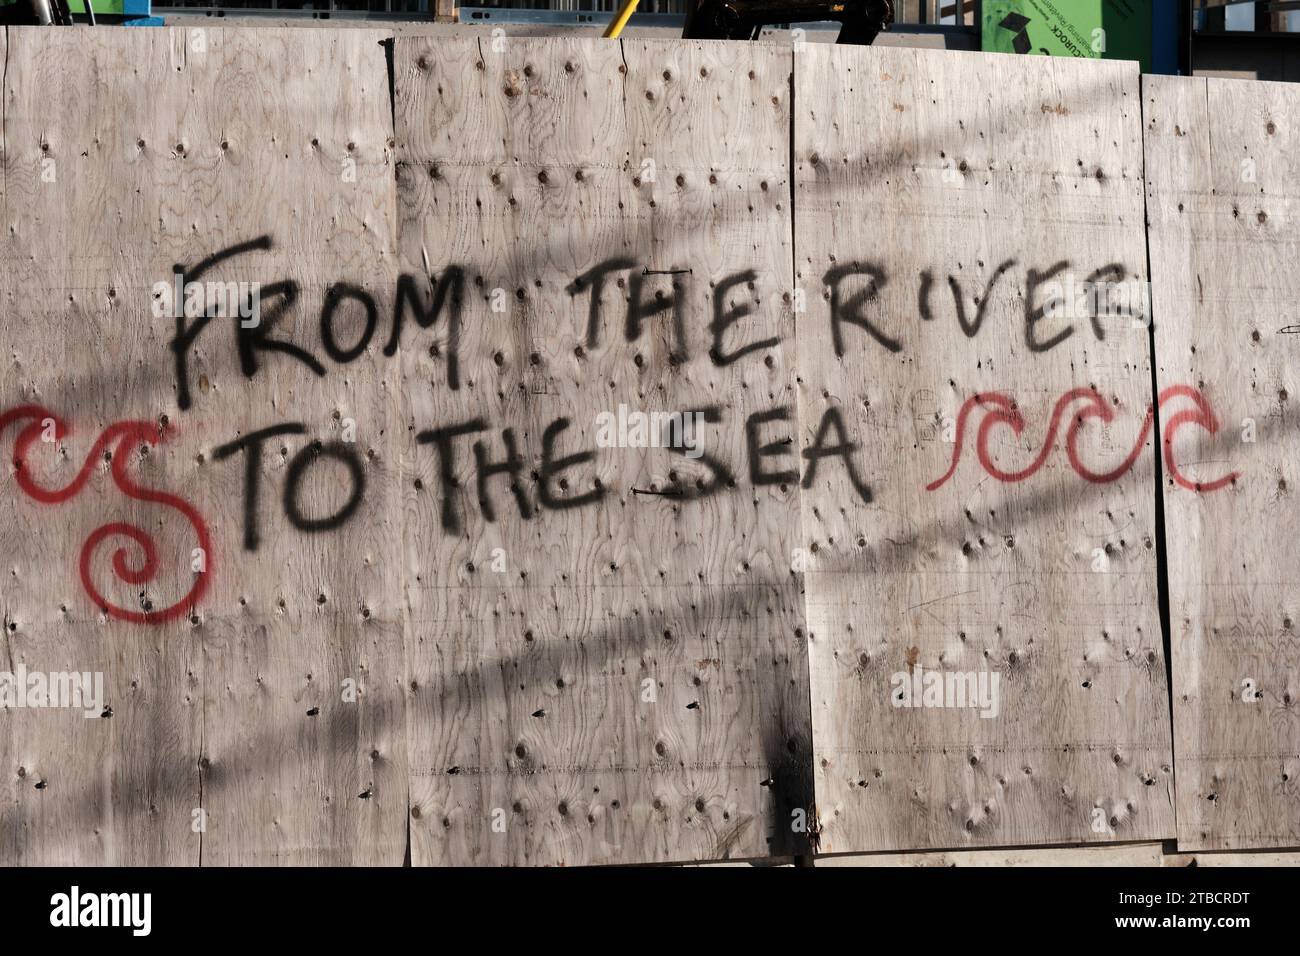 'From The River To The Sea' graffiti on construction board Stock Photo